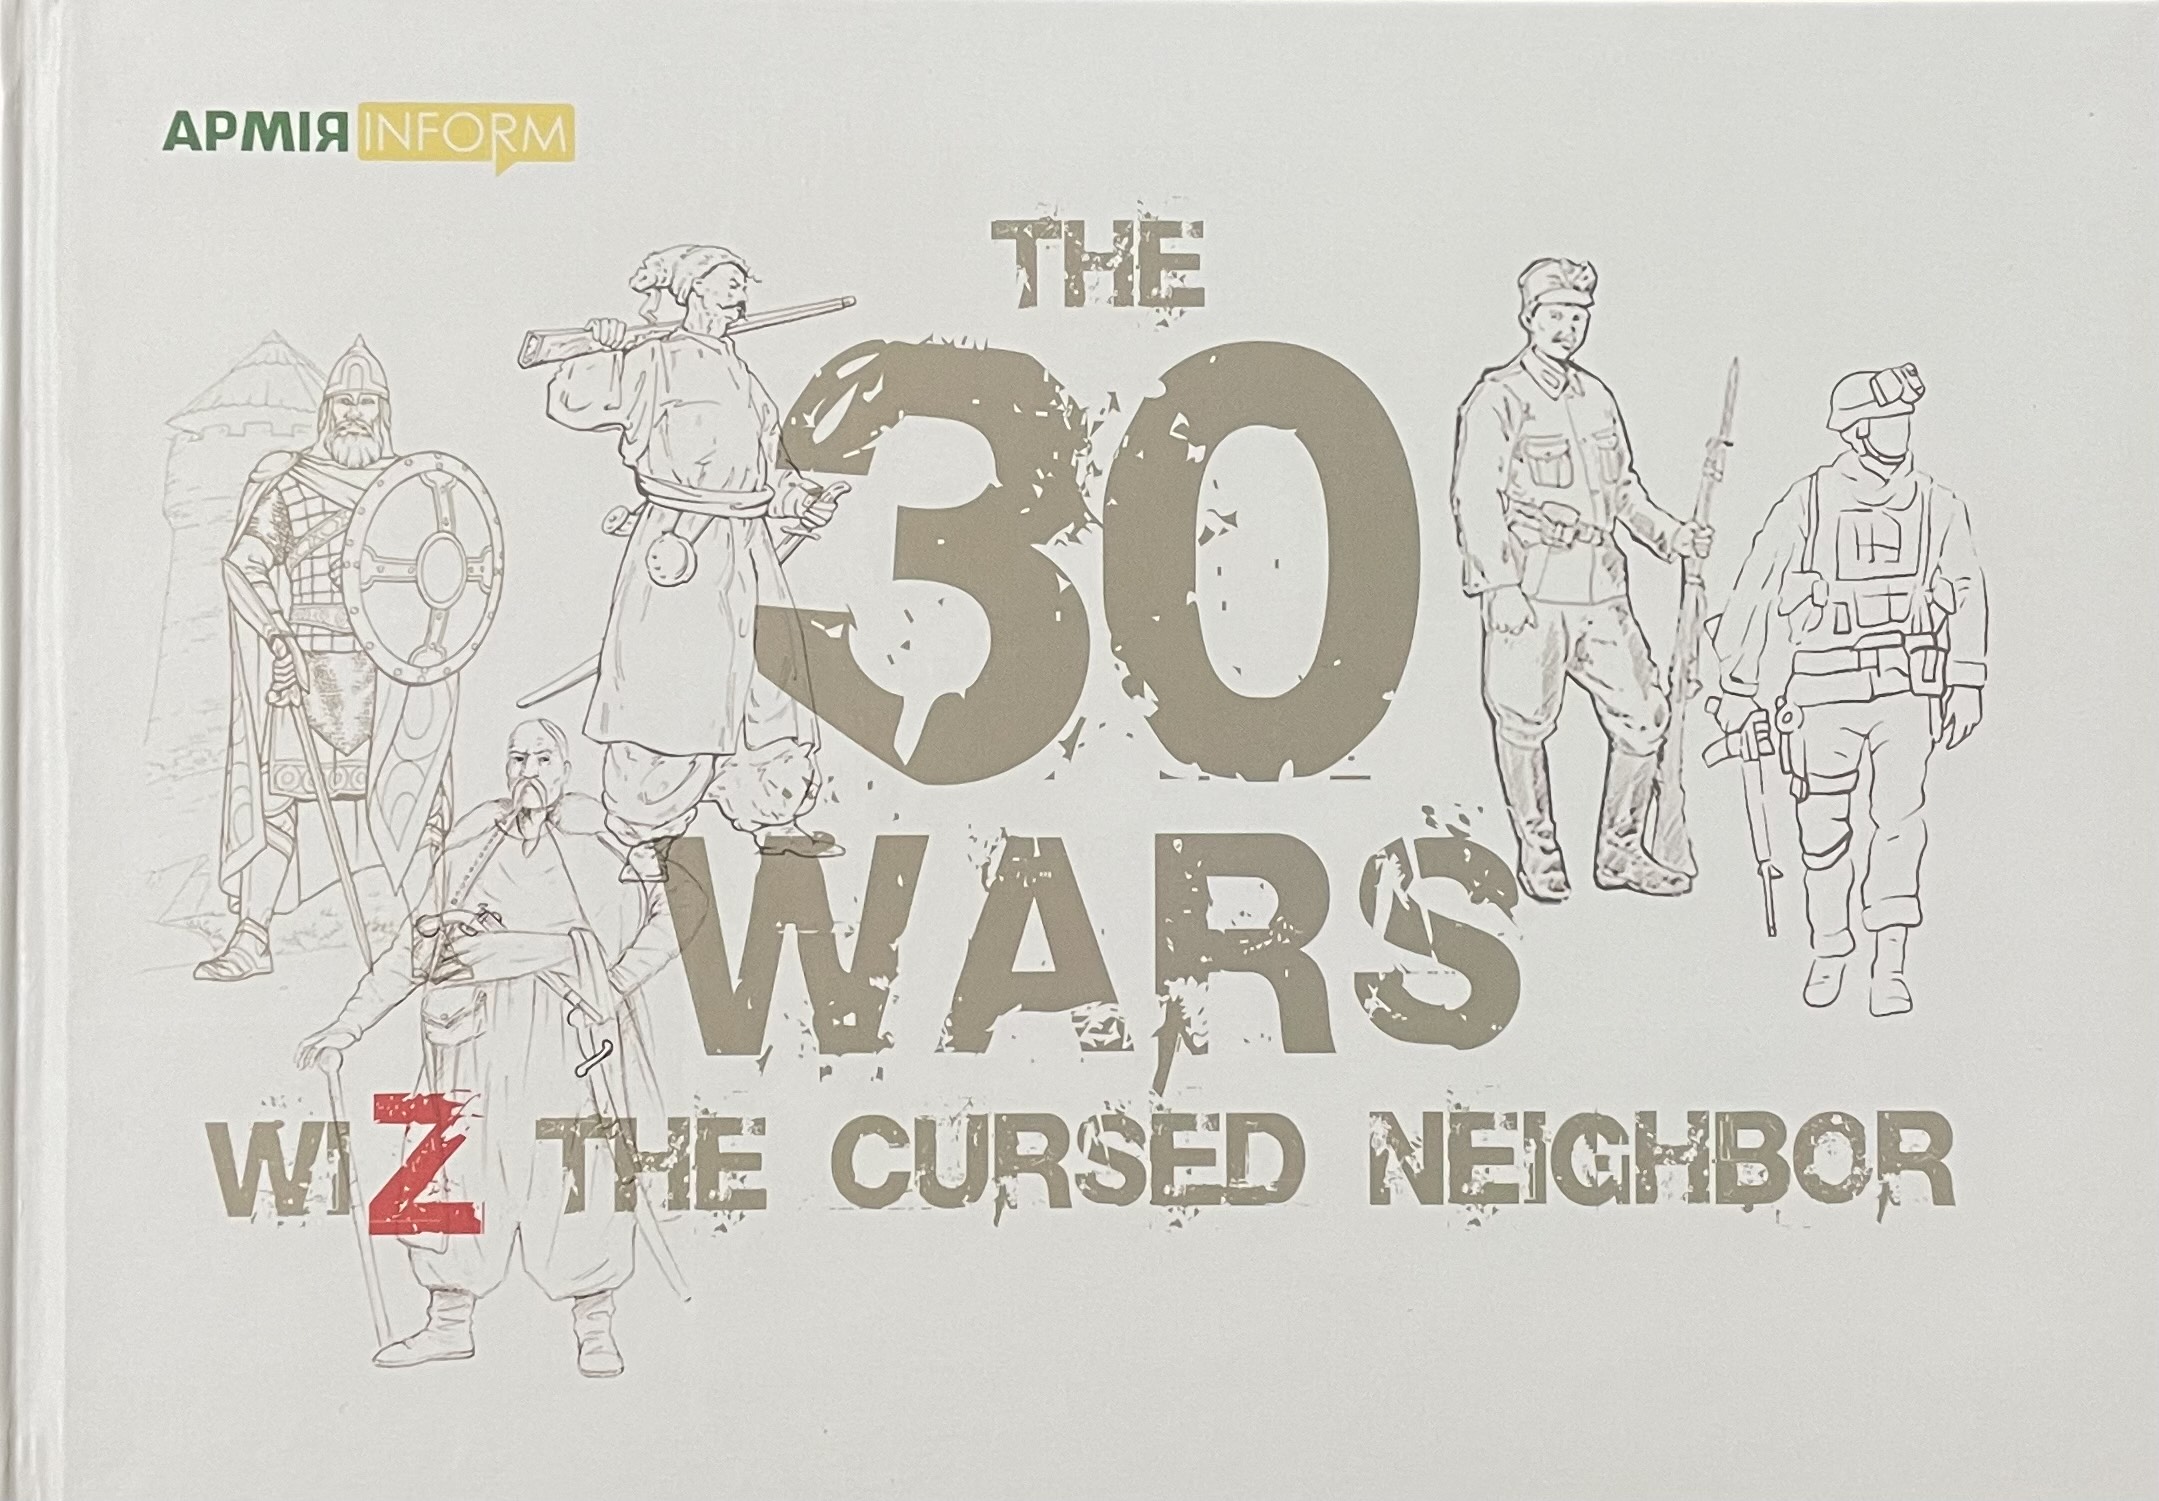 The 30 Wars wiZ the Cursed Neighbour